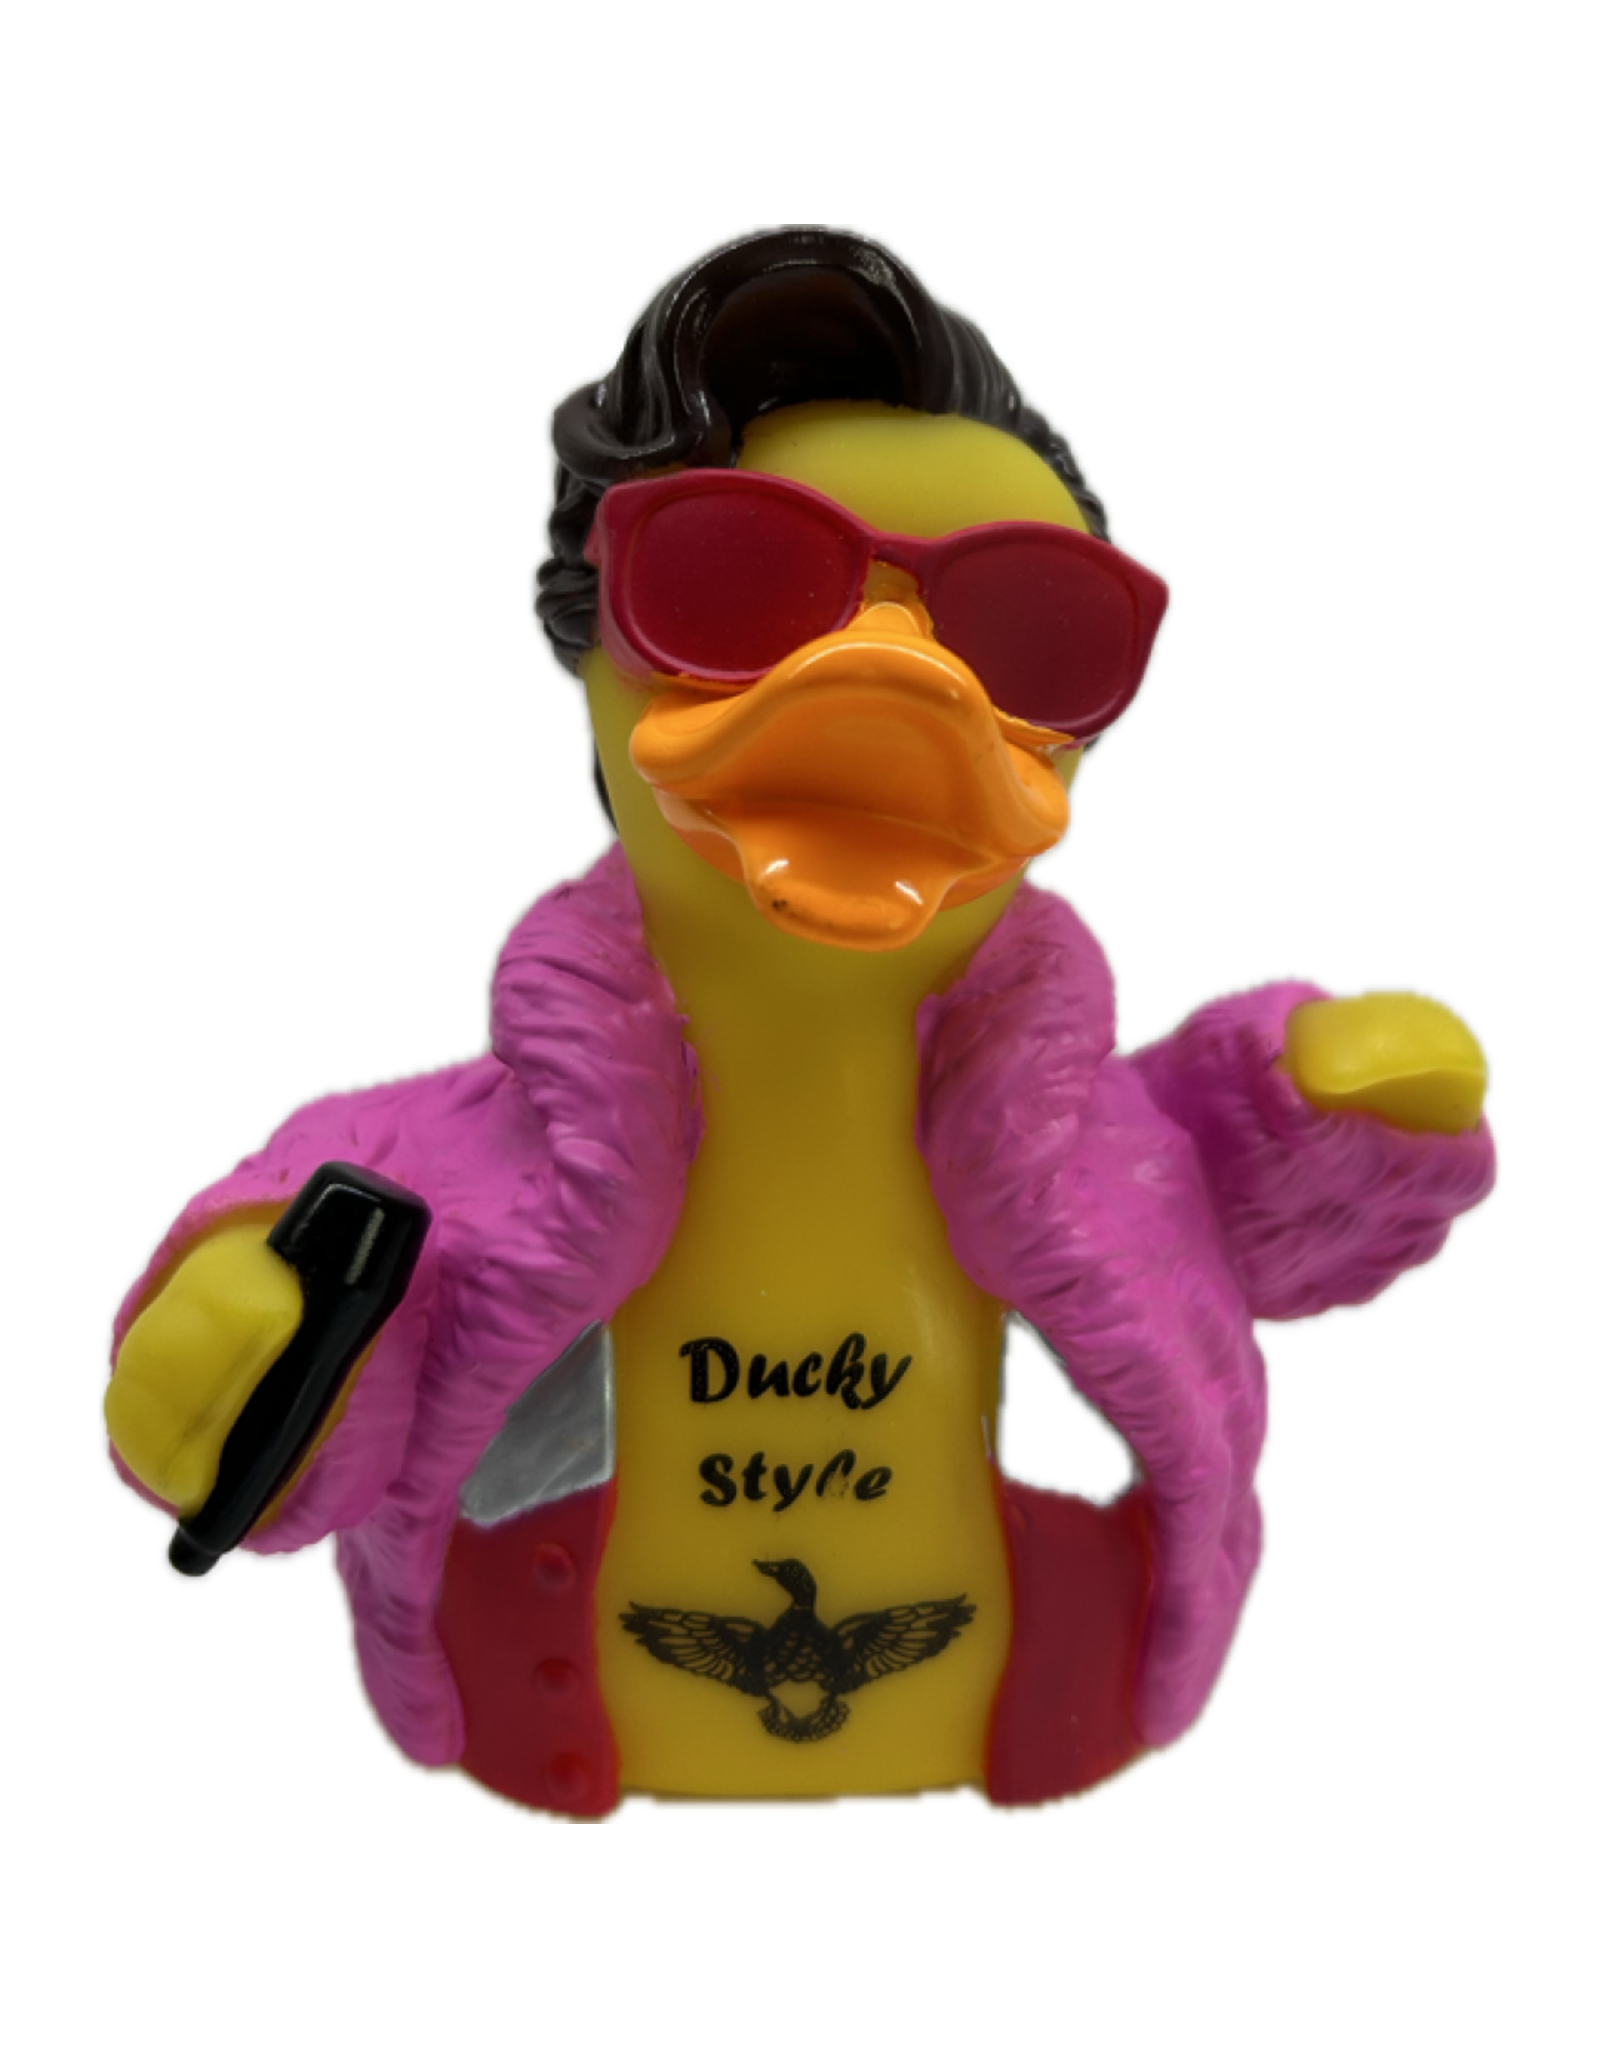 Ducky Style - Watermelon Waddle Rubber Duck